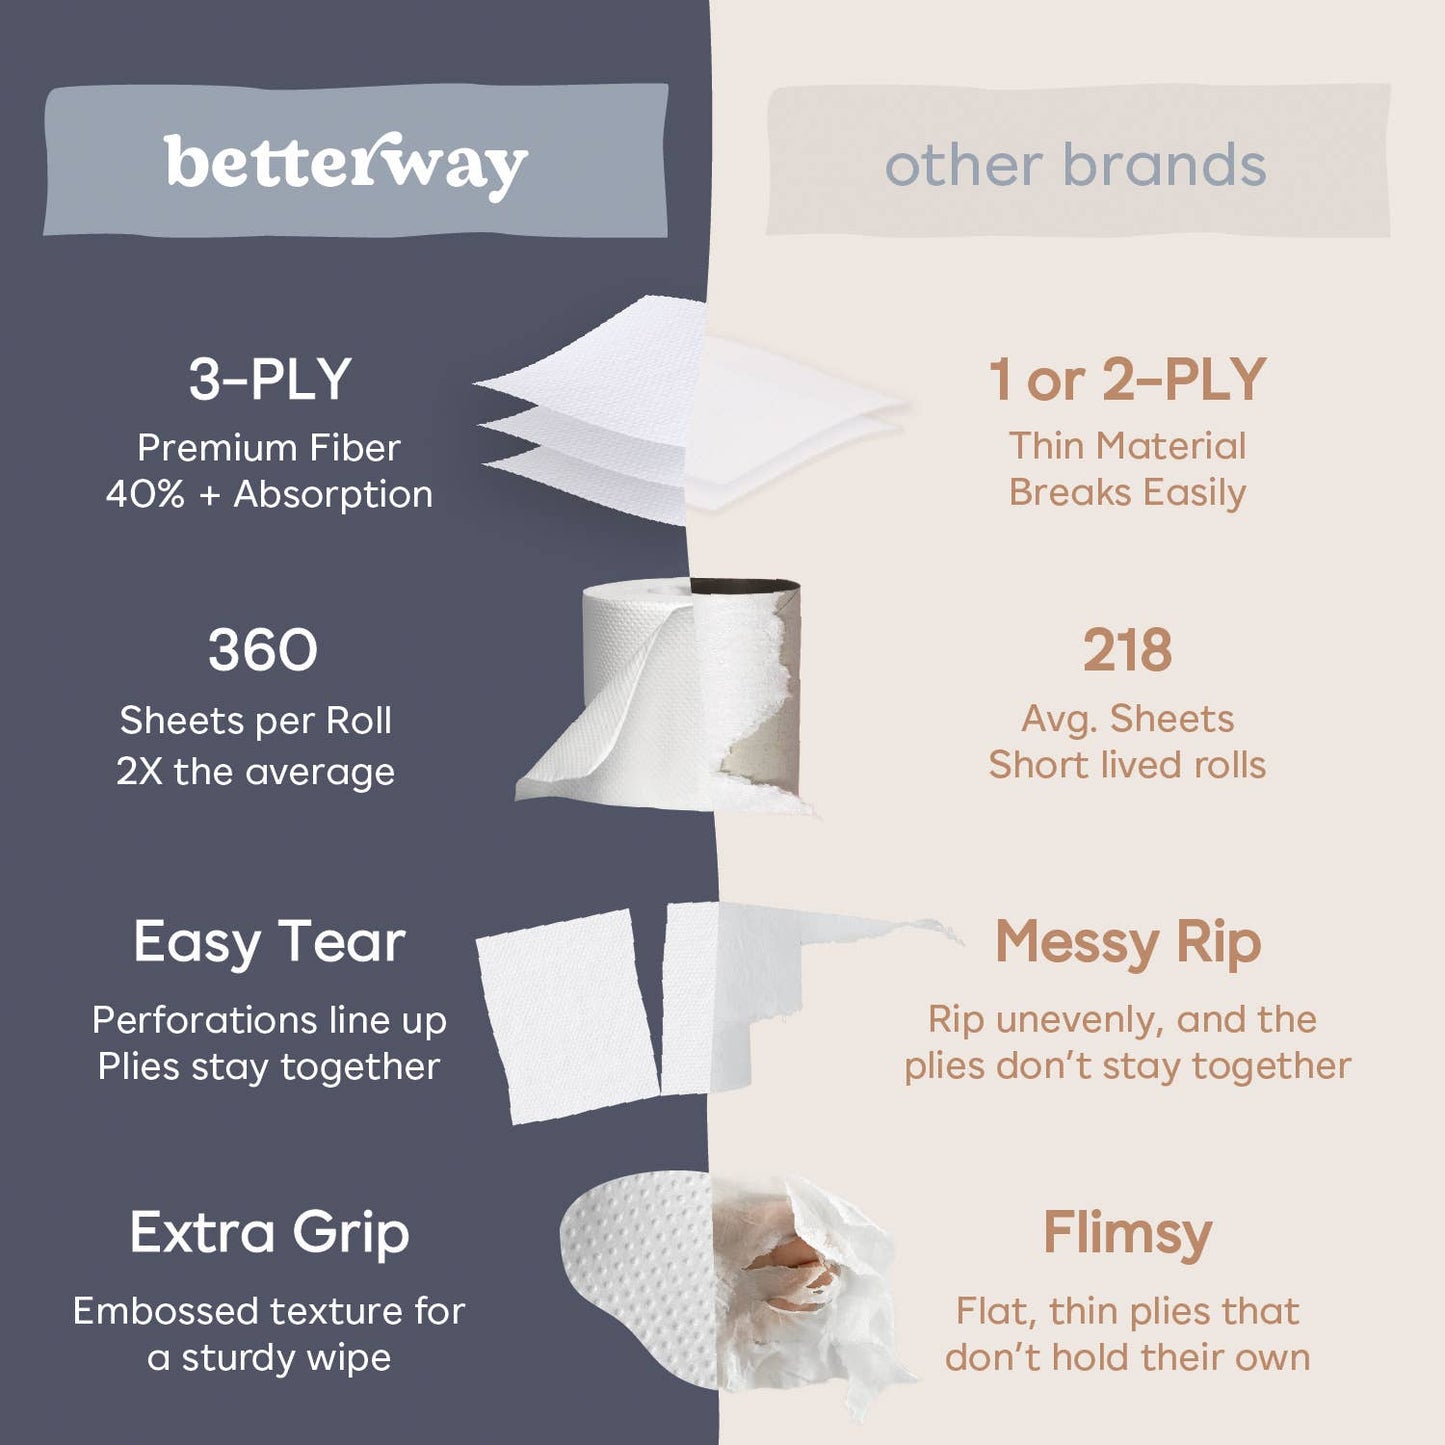 Betterway Bamboo Toilet Paper (1 Roll)